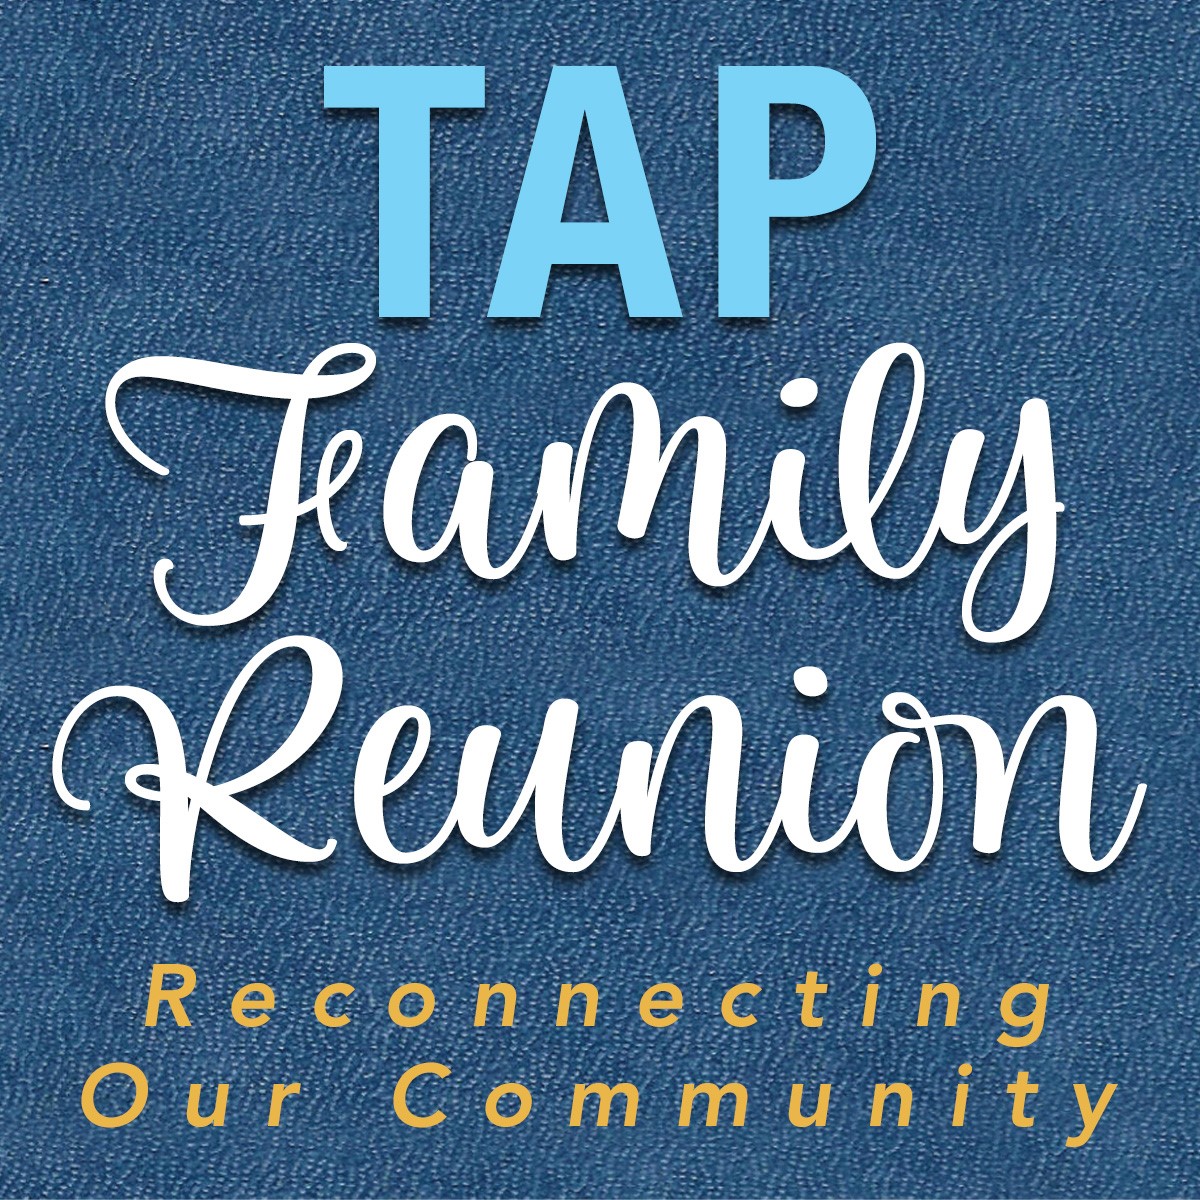 Triangle Aphasia Project Announces New Website and TAP Family Reunion on June 23